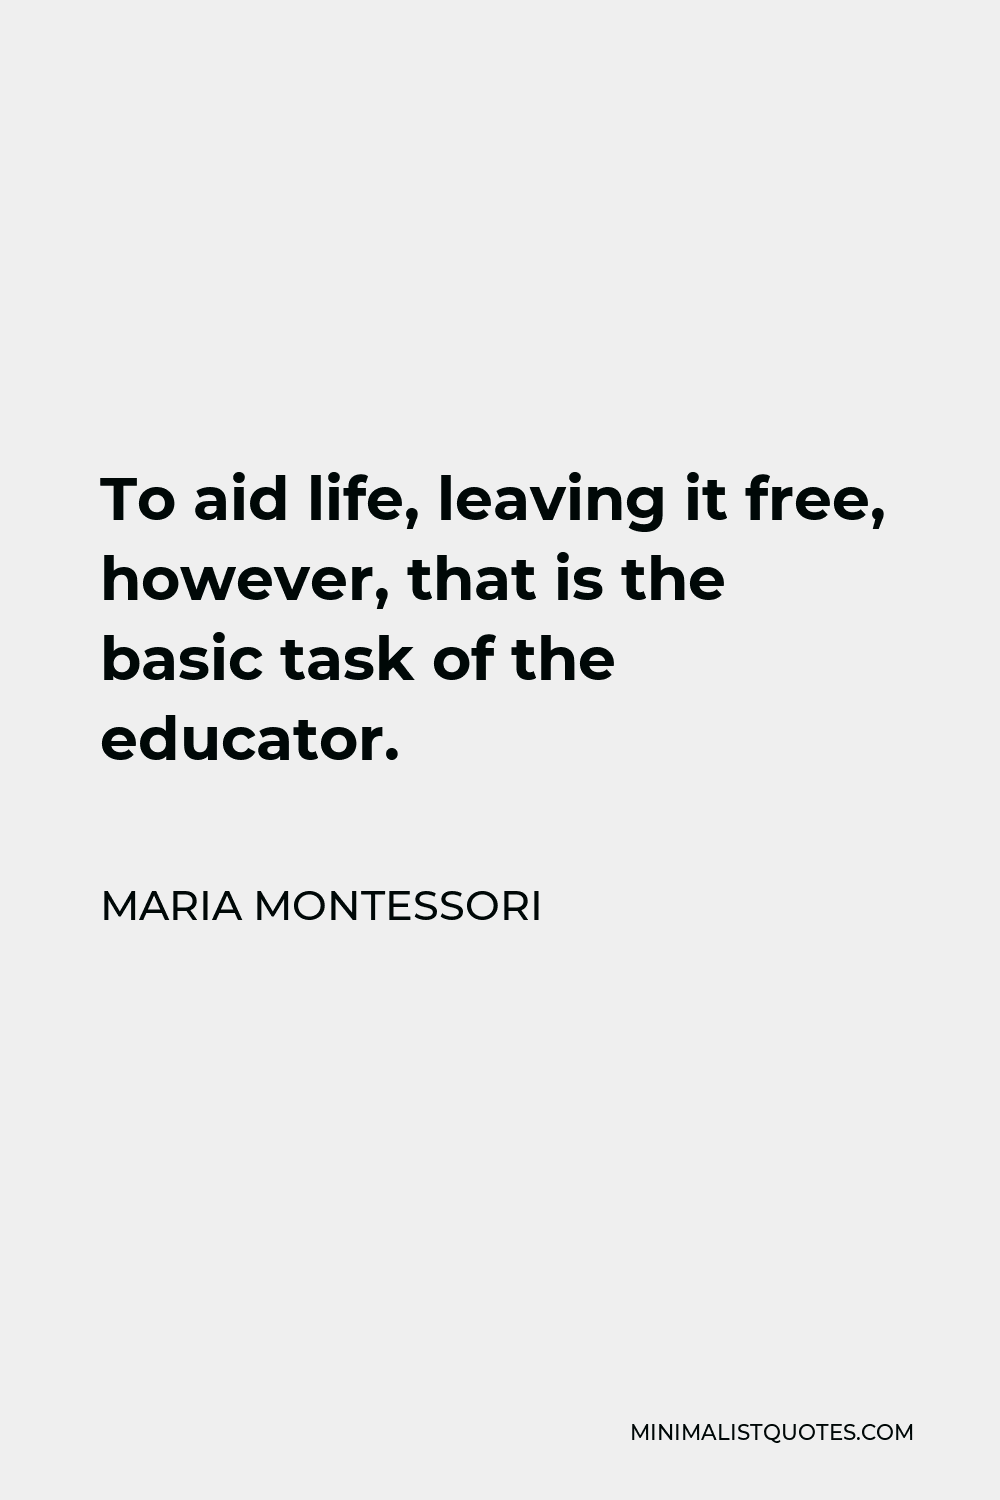 Maria Montessori Quote - To aid life, leaving it free, however, that is the basic task of the educator.